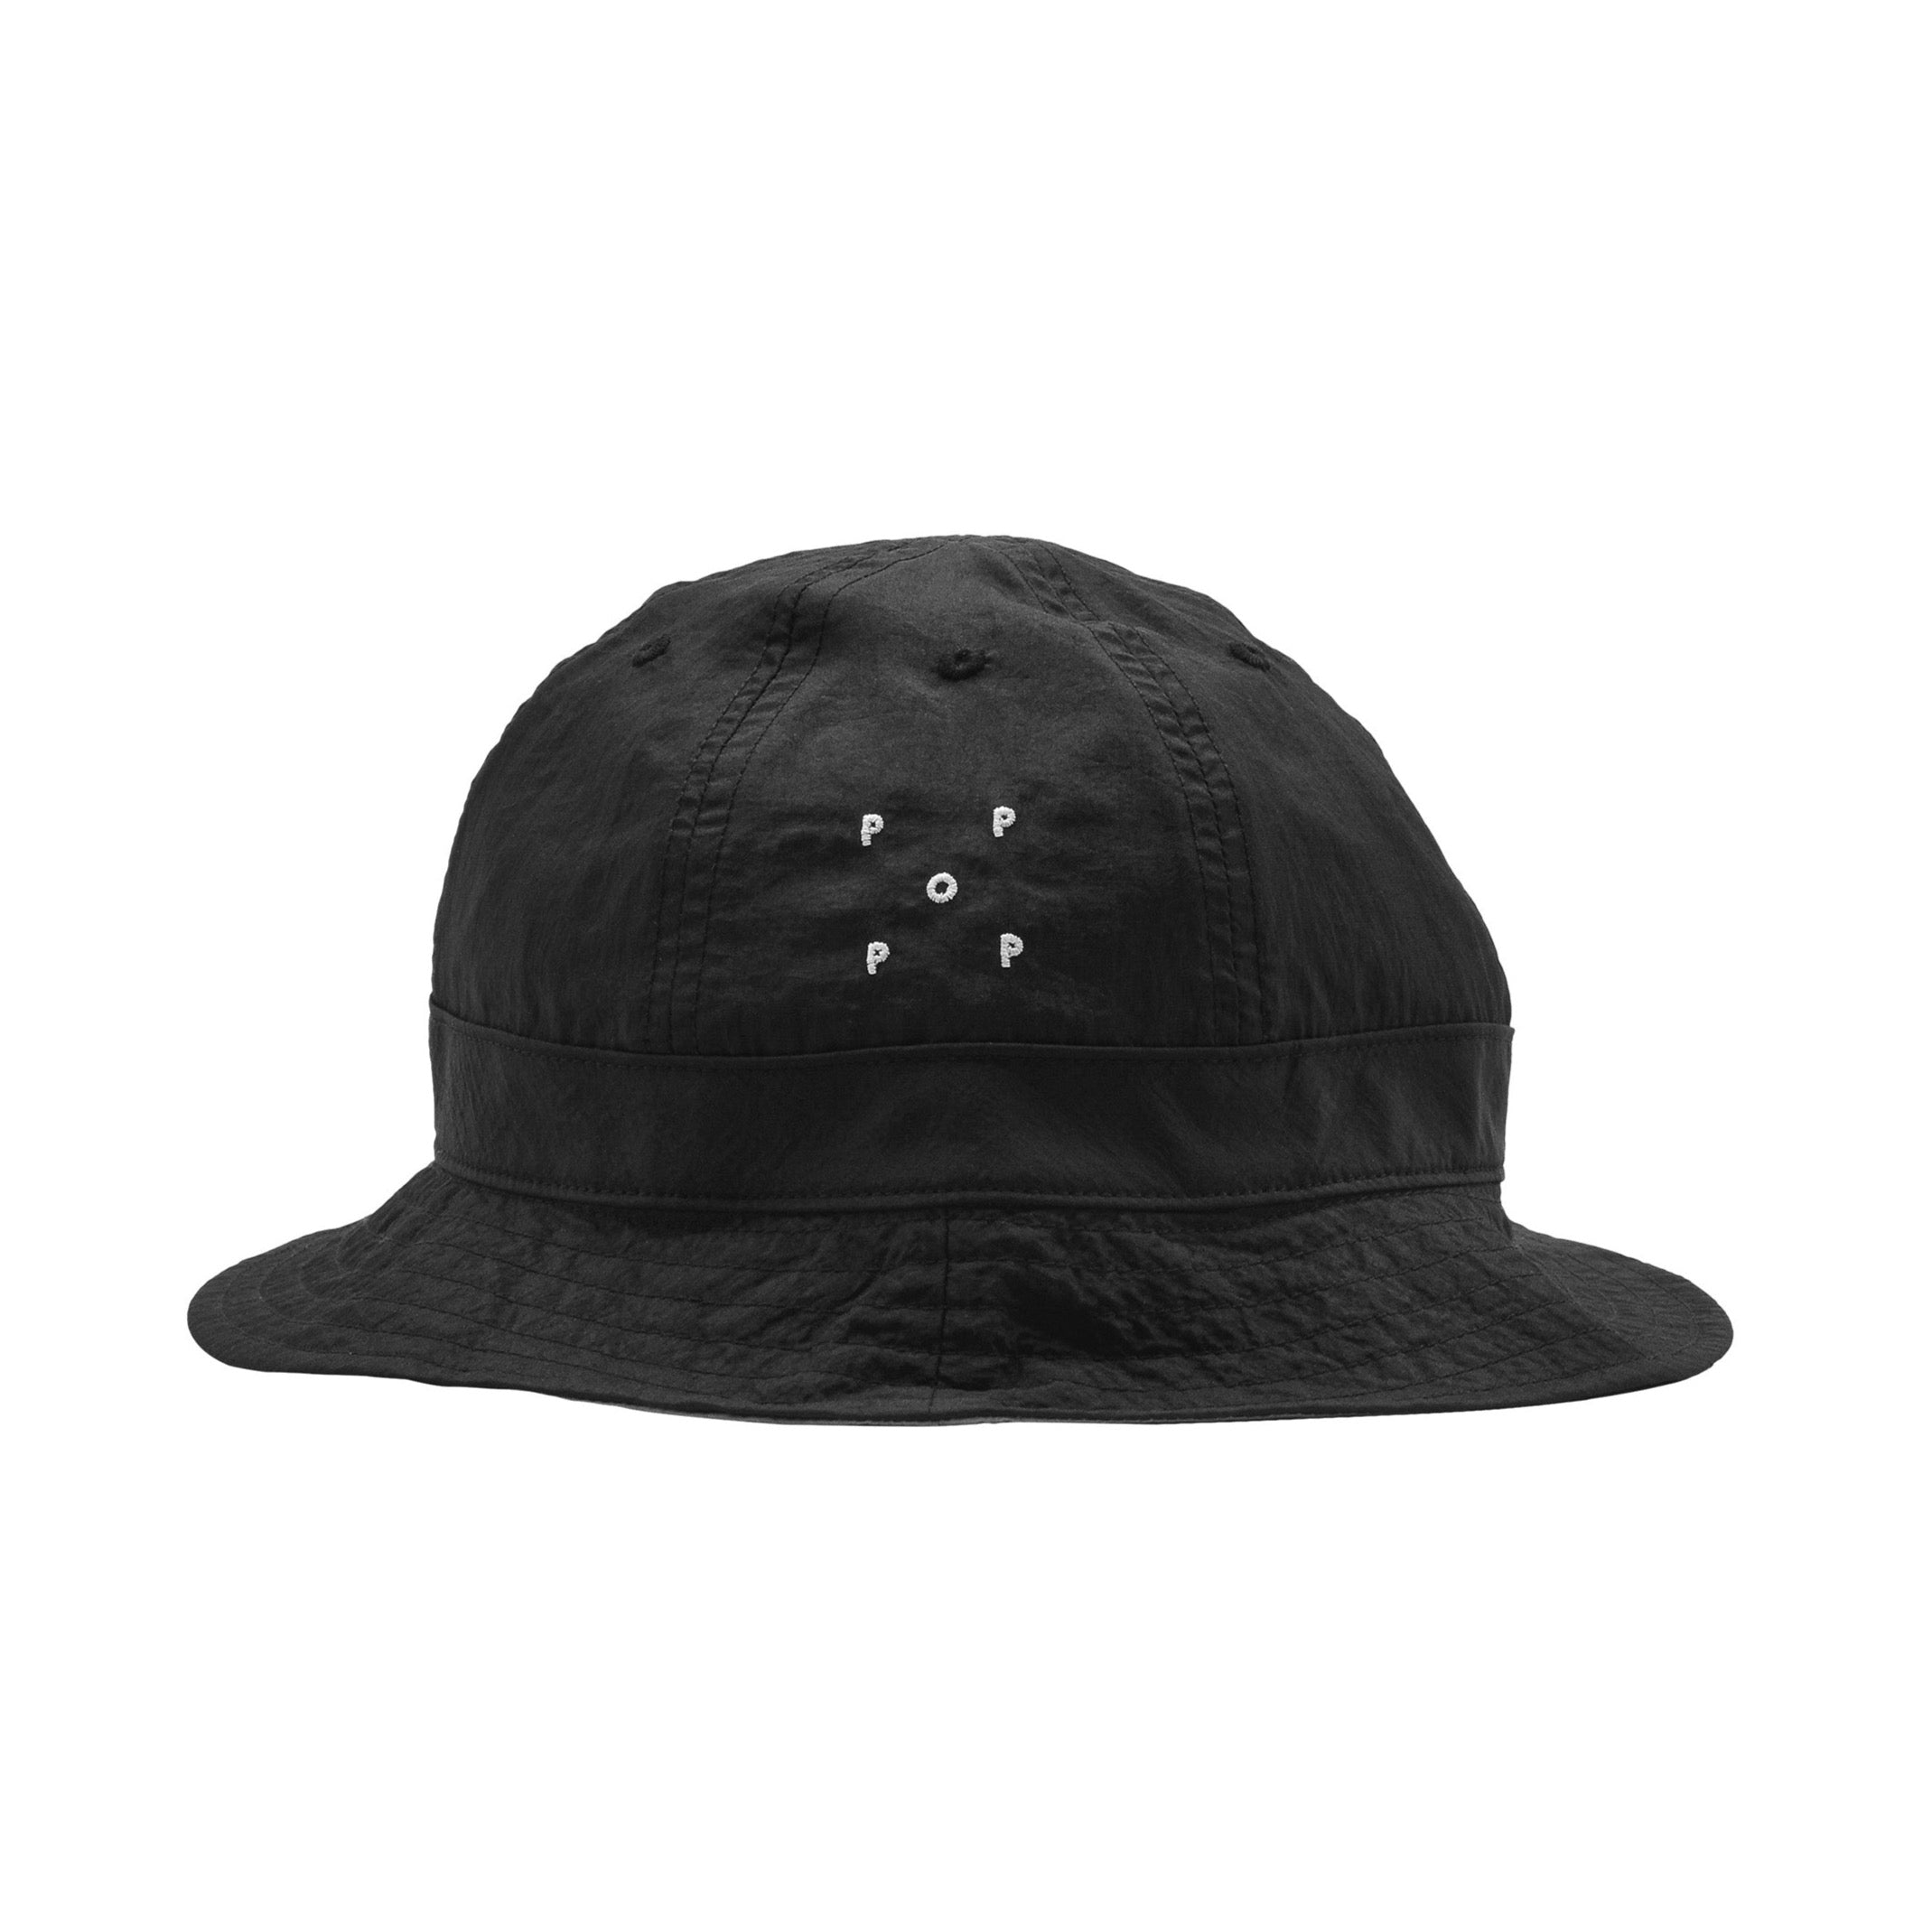 Pop Trading Company - Trading Company - Reversible Bell Hat - Black / Silver